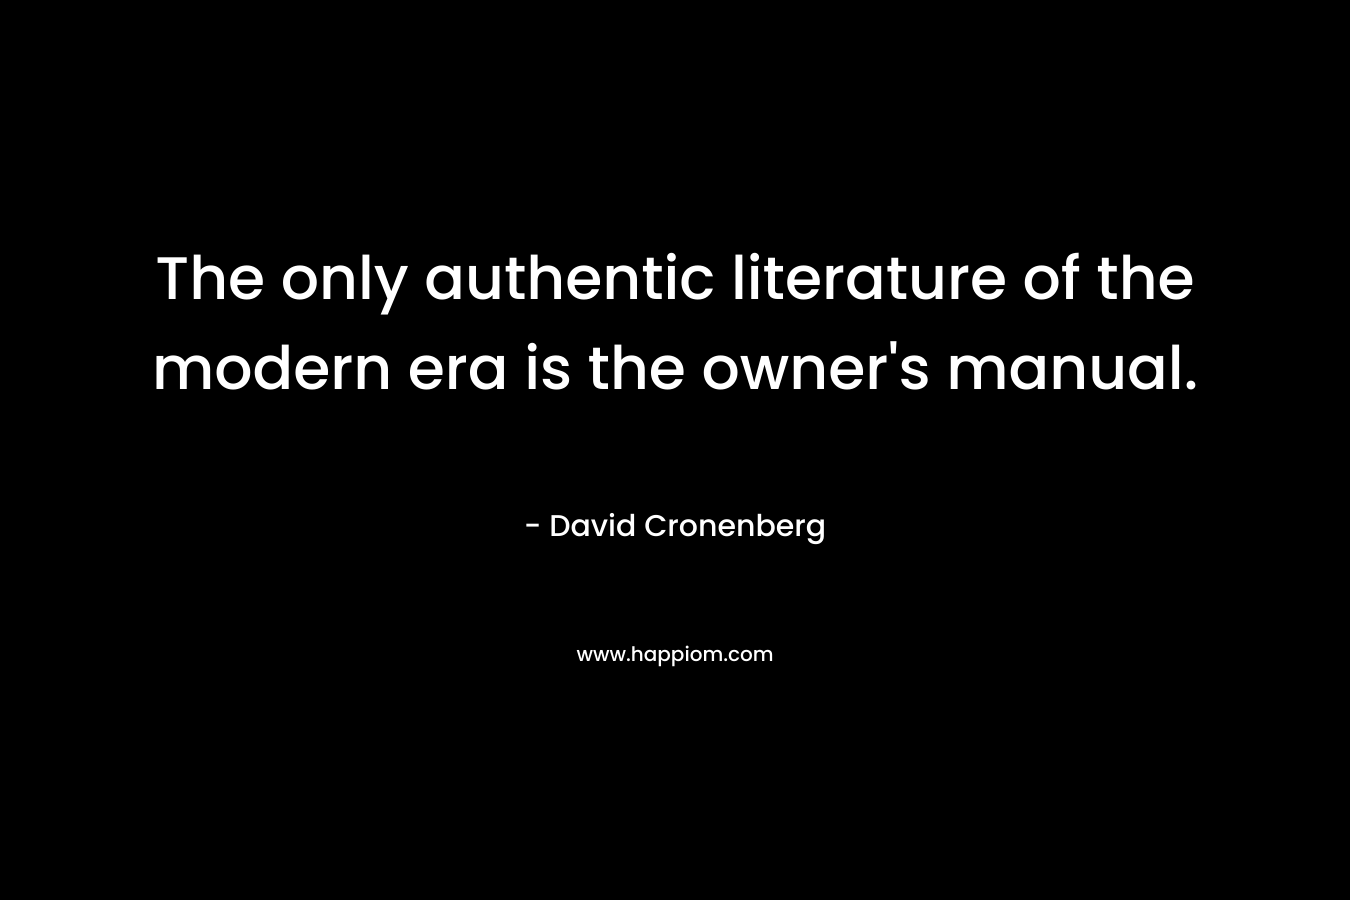 The only authentic literature of the modern era is the owner’s manual. – David Cronenberg